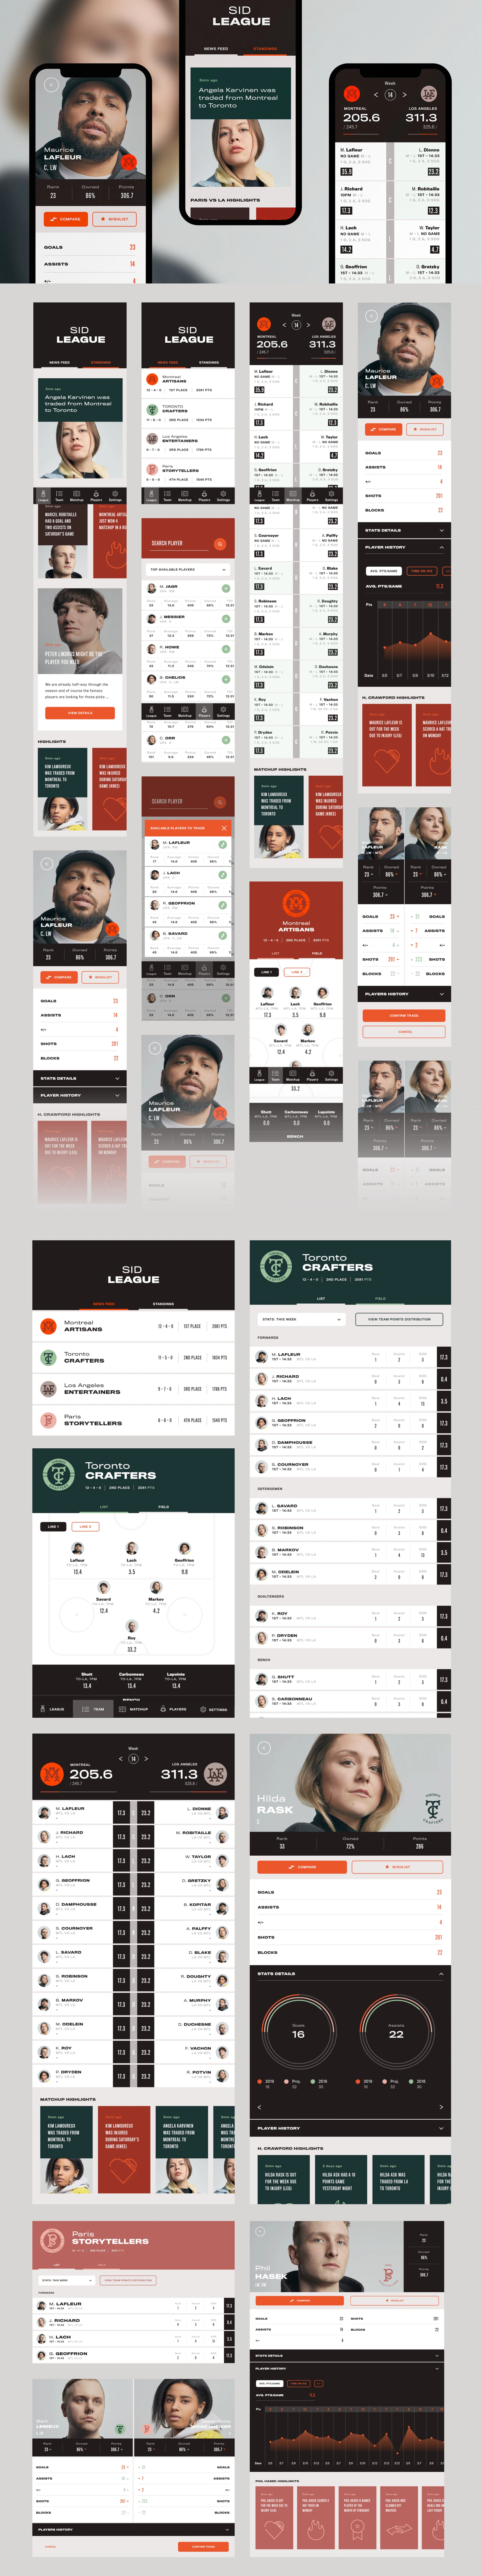 Sid League UI Kit for Adobe XD - Sid League is a UI toolkit that combines our Montréal studio’s three greatest passions: Craftsmanship, cutting-edge design and ice hockey.